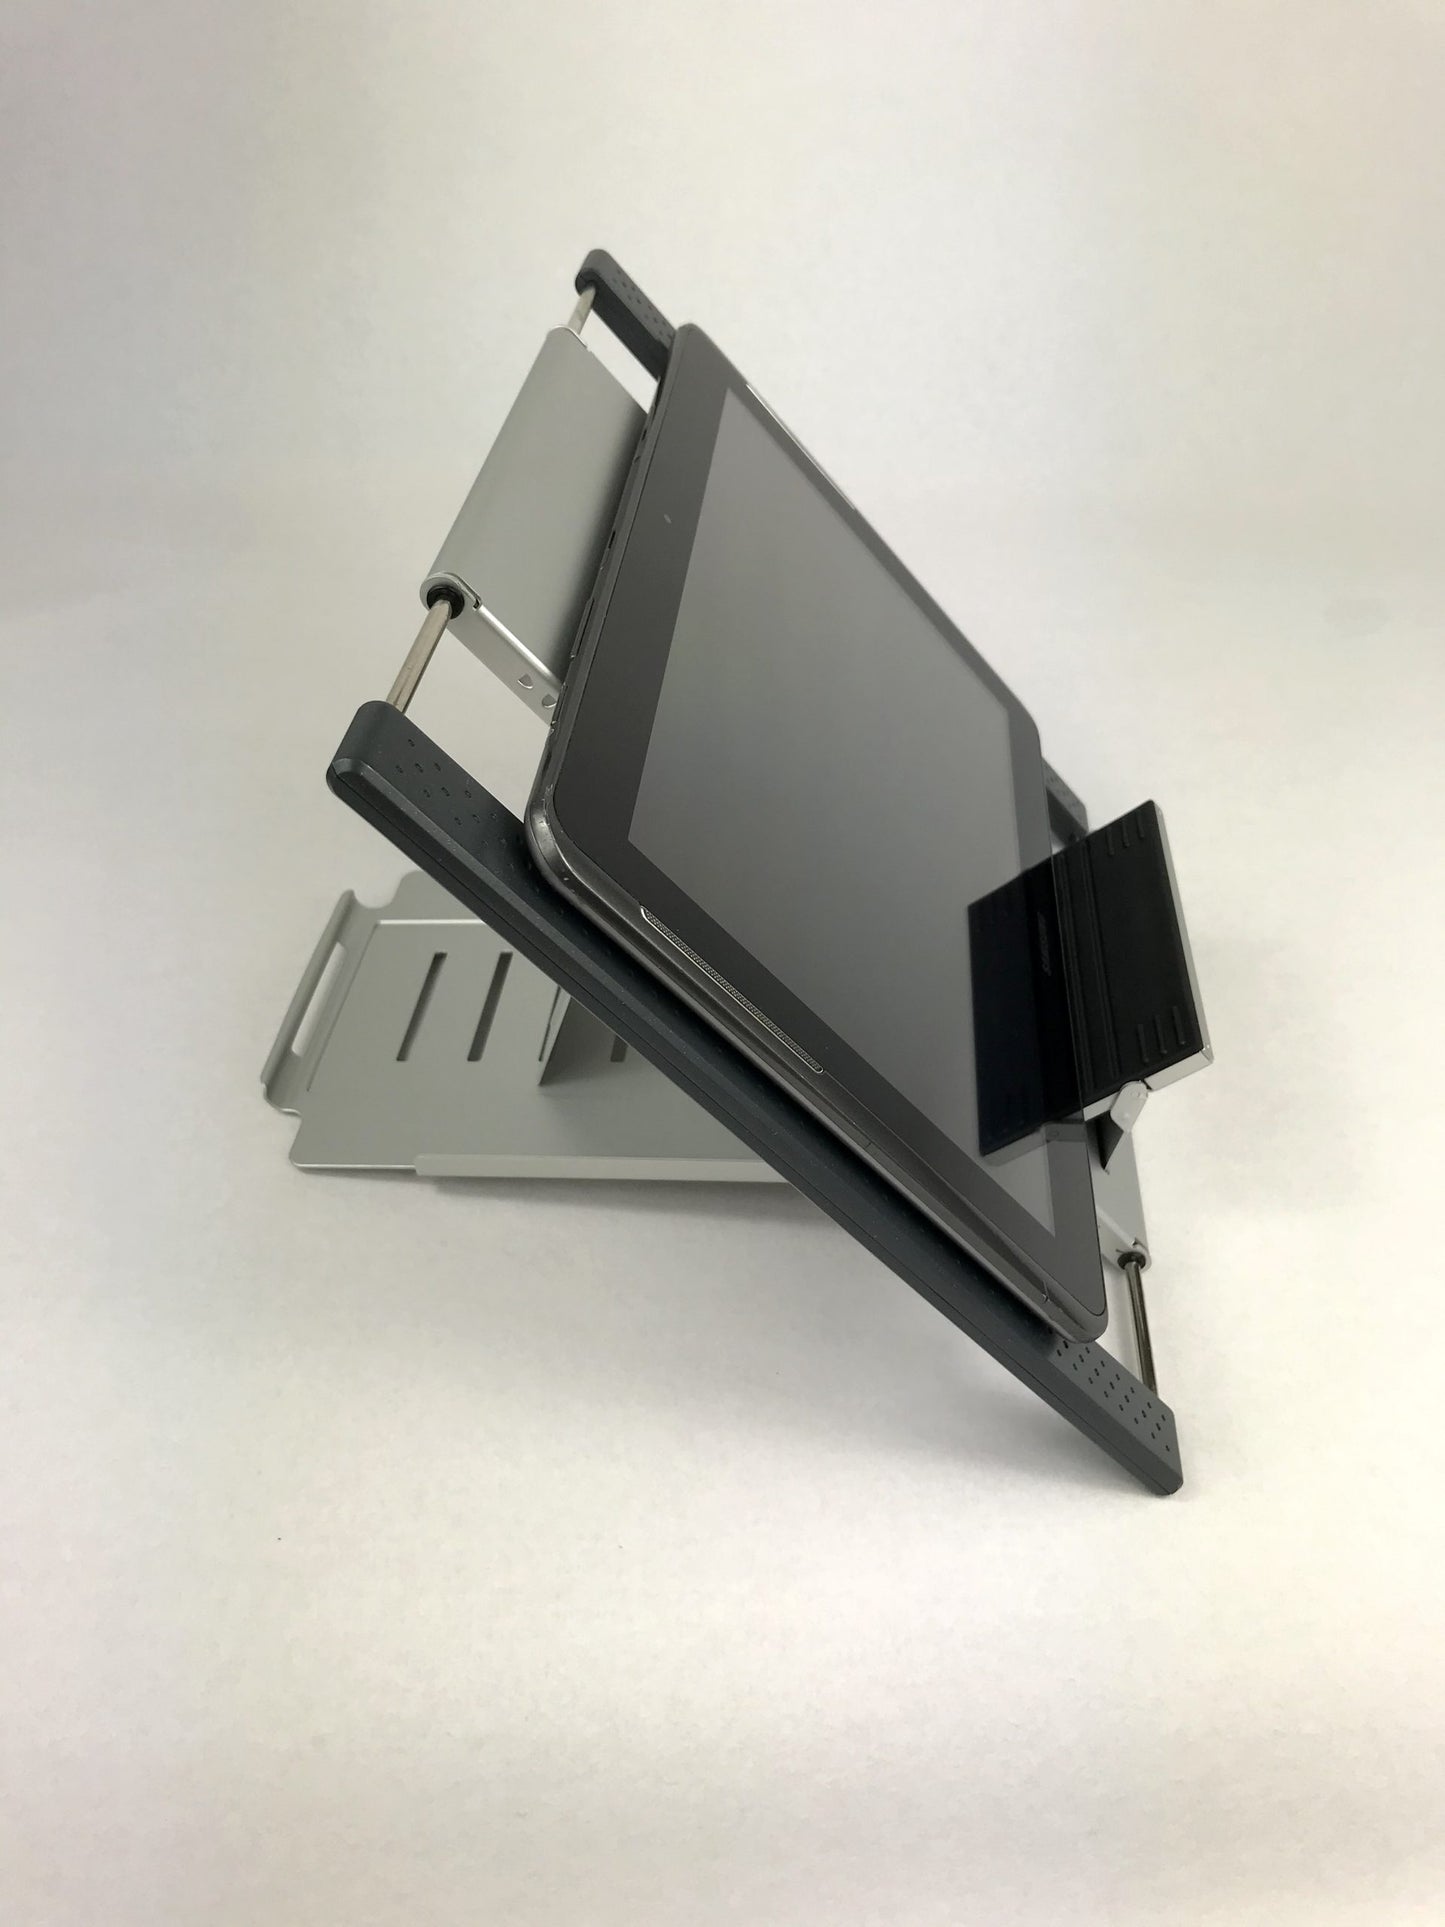 PRO ERGO STAND - ingenious design stand solution for laptop, iPads or tablets